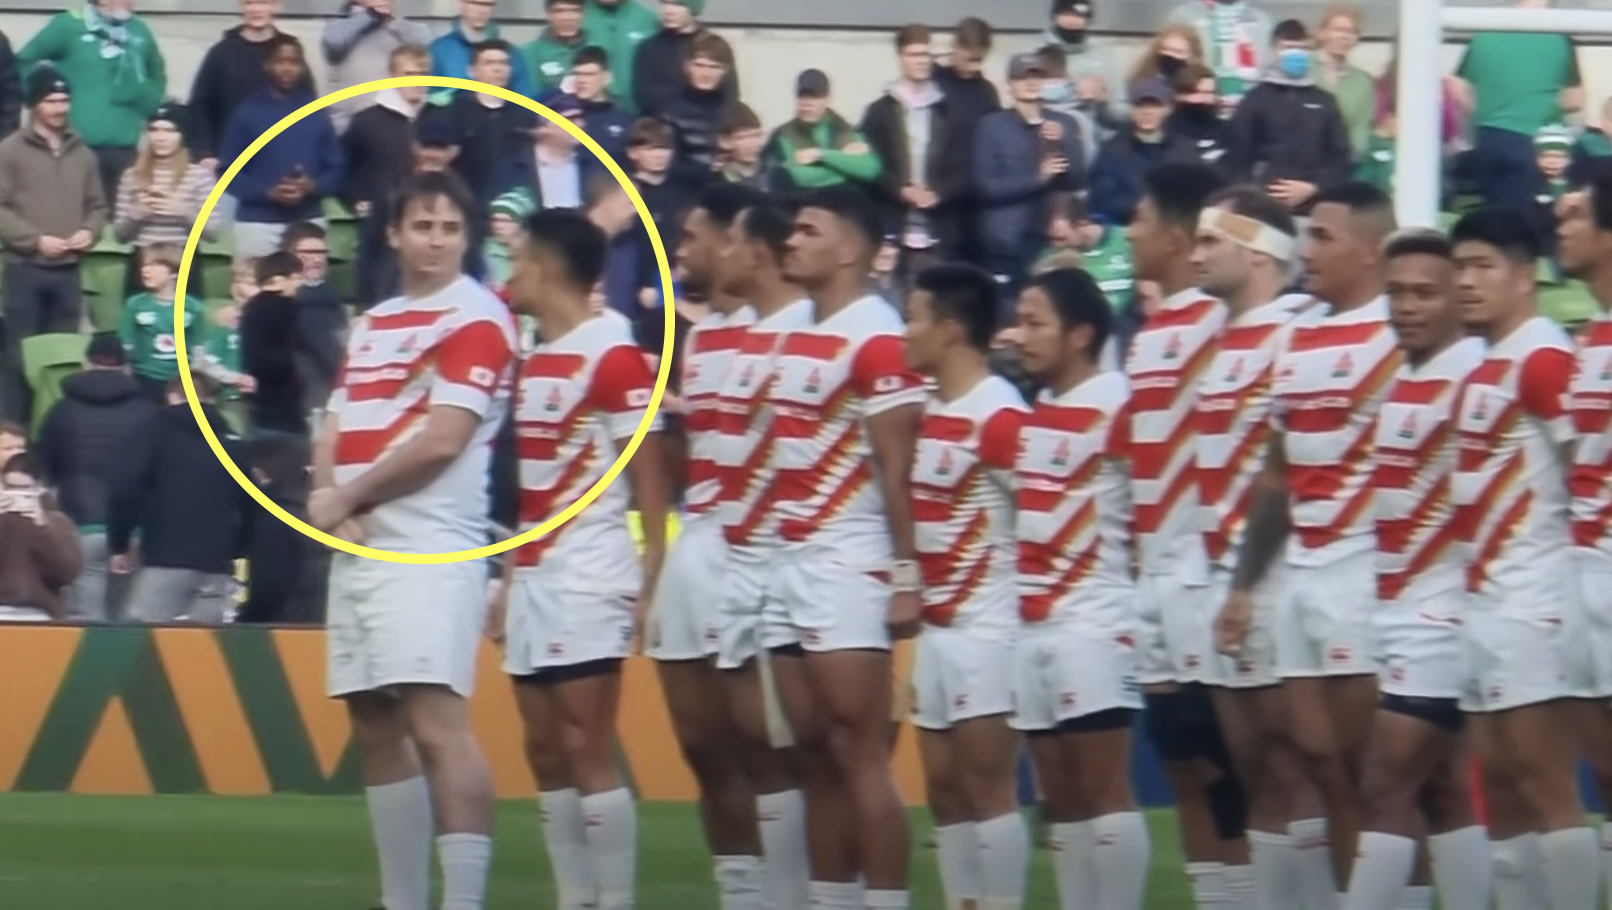 Watch Jarvo69 get absolutely levelled by Twickenham security